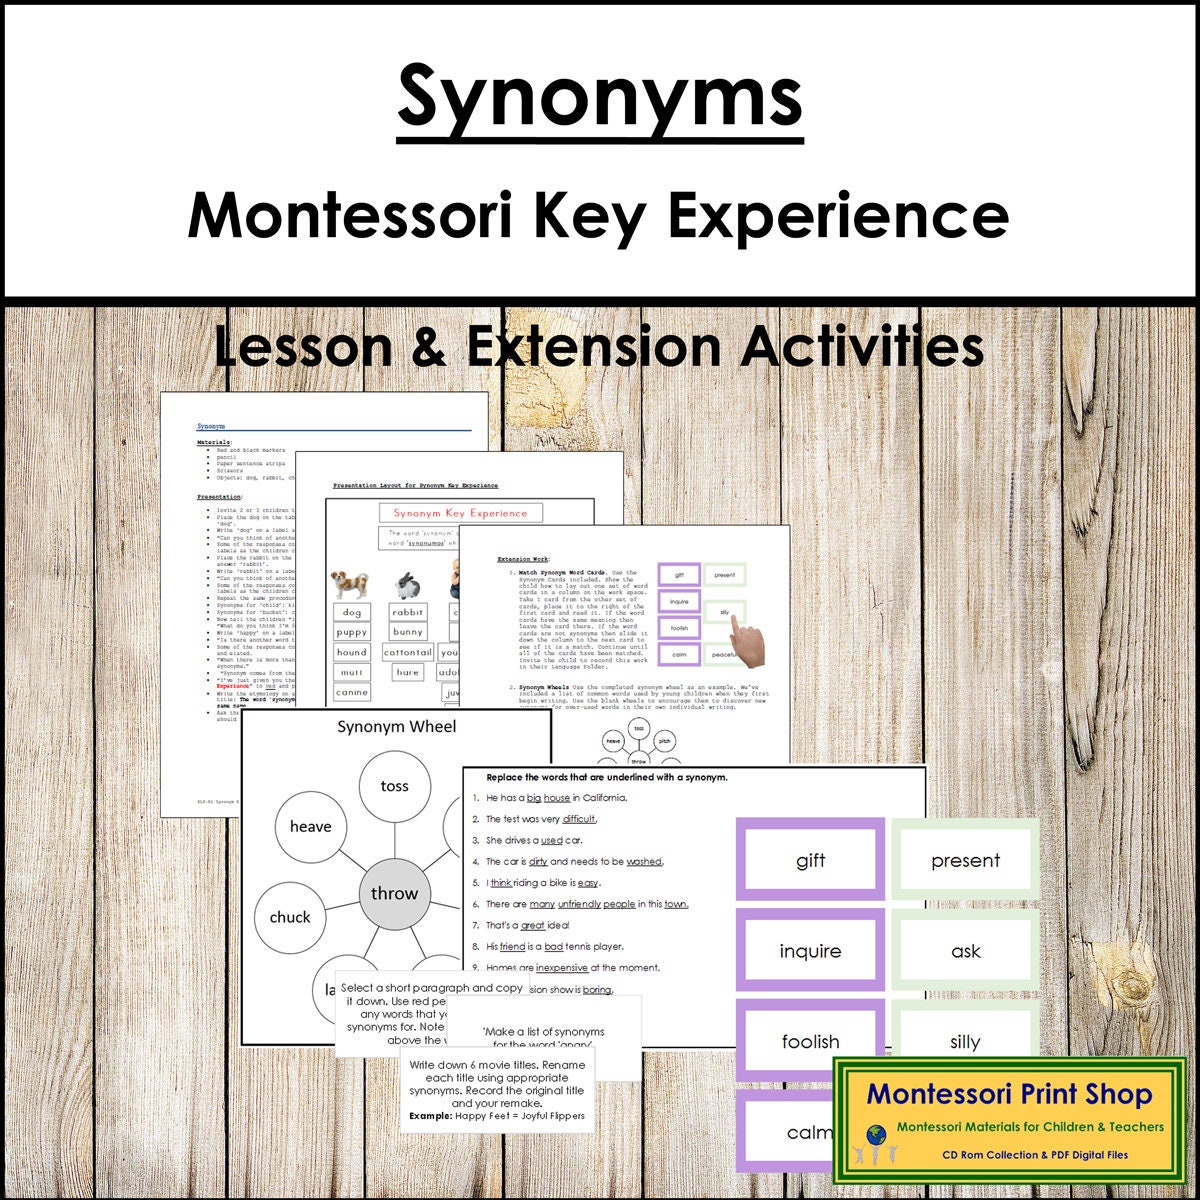 Synonym and Antonym Games: Use I have, Who has Cards for Games your  Intermediate Students will Love - Elementary Engagement